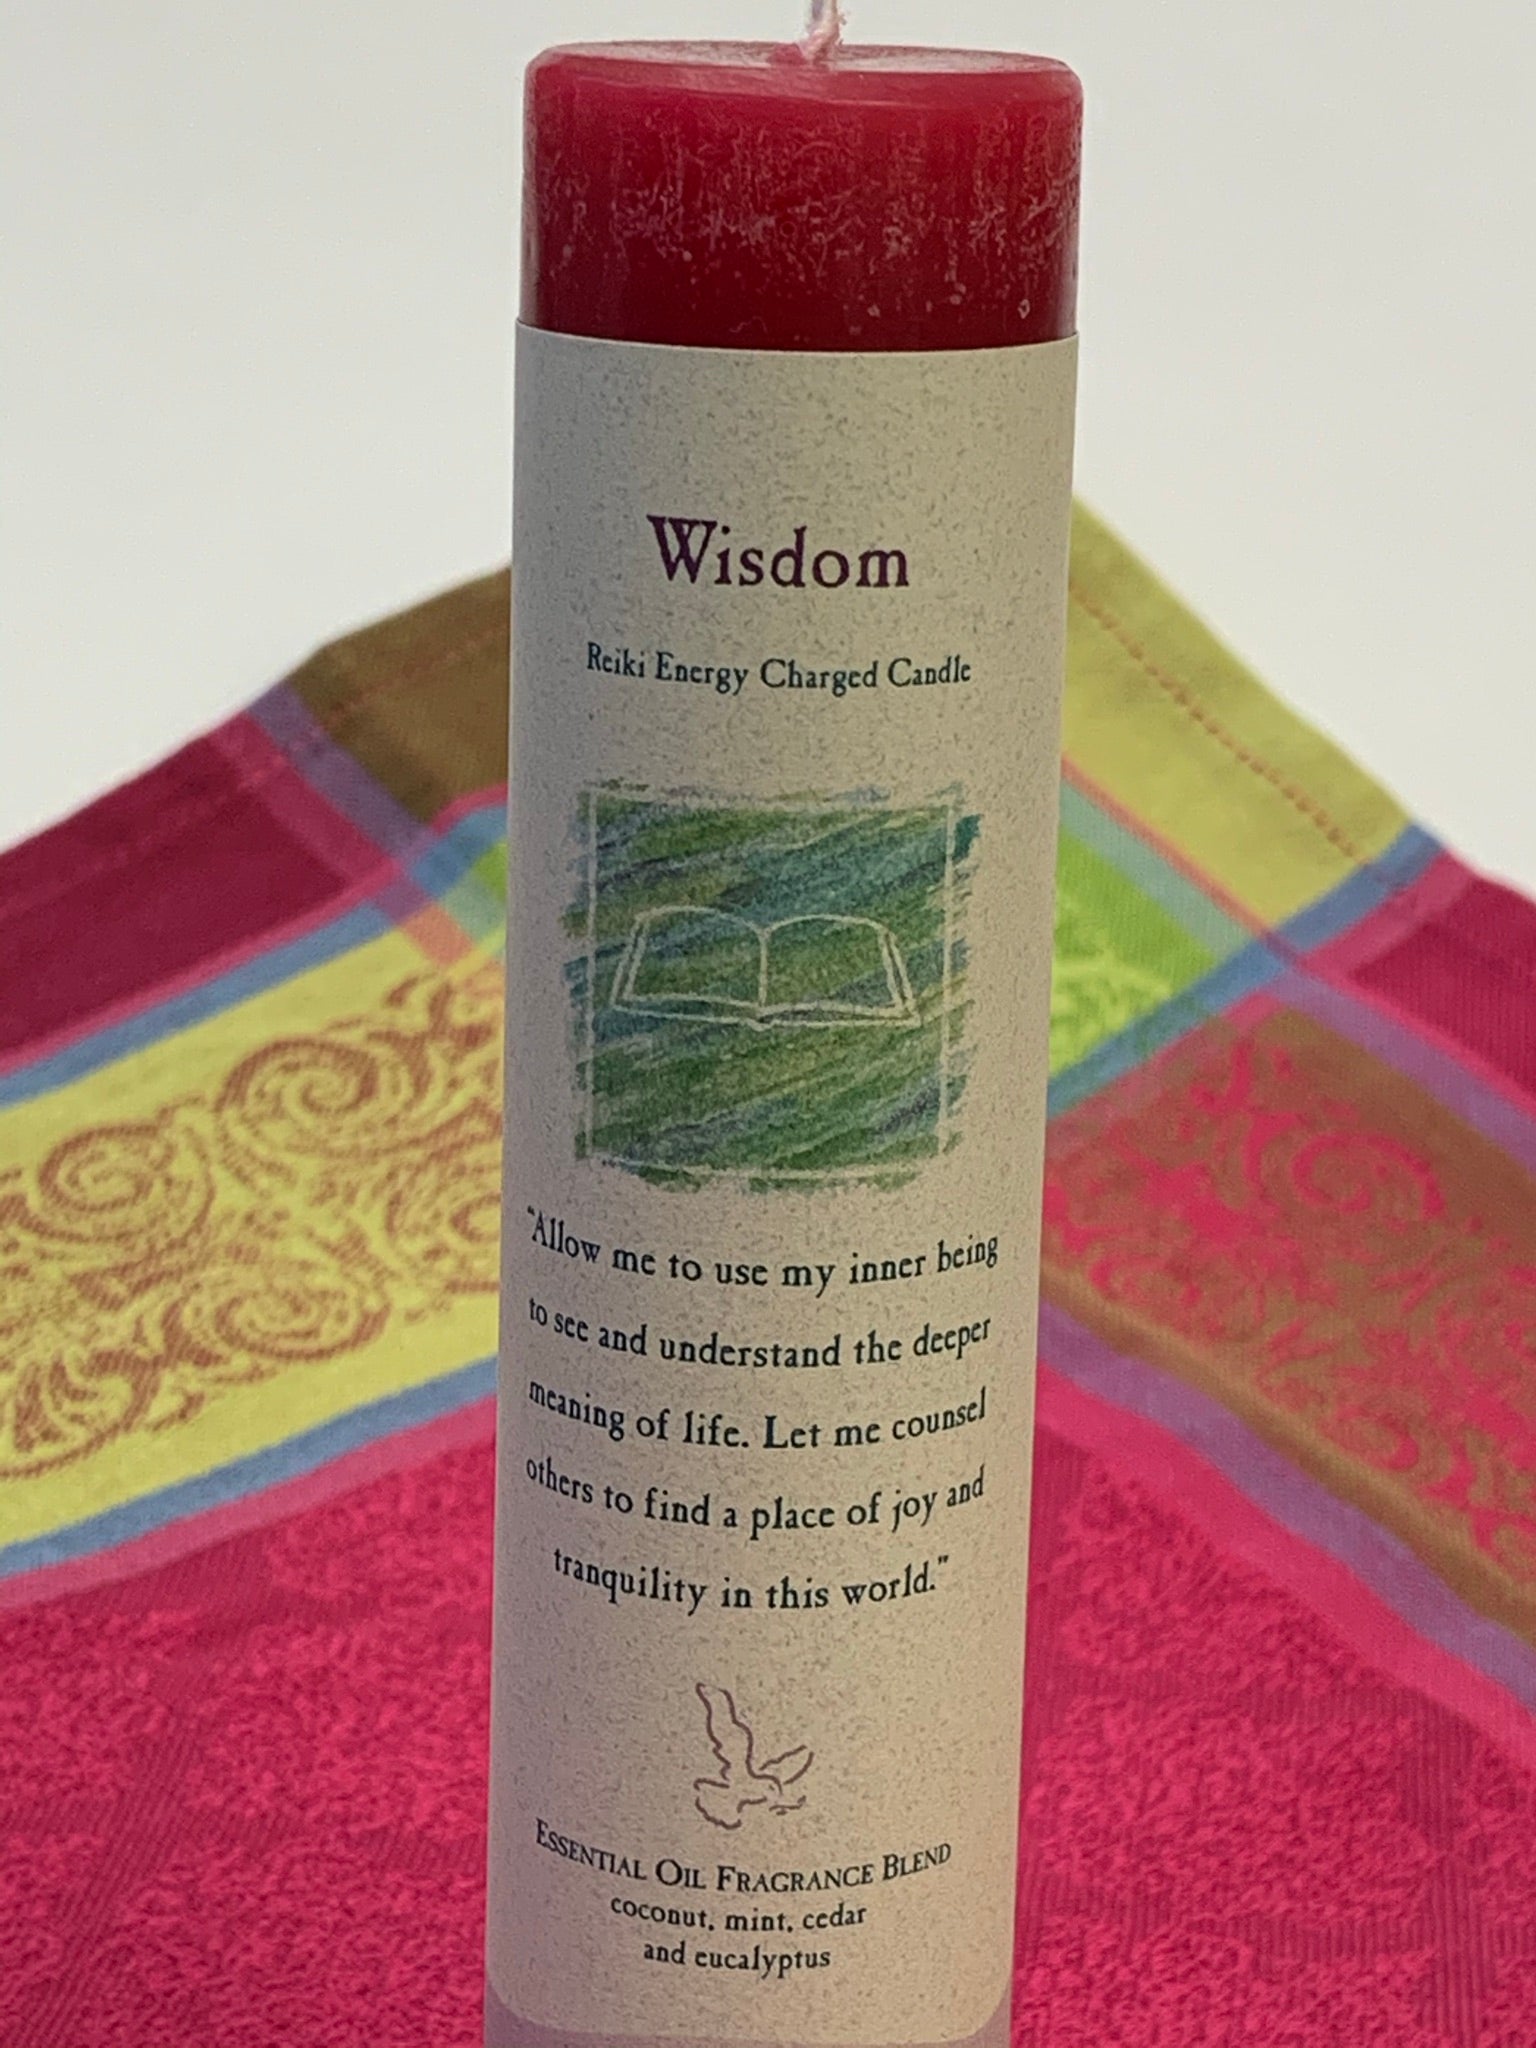 Close-up view of the Reiki-charged pillar candle for "wisdom." It is handcrafted and scented using essential oils (coconut, mint, cedar & eucalyptus. An affirmation/prayer is printed on the label as well as a listing of the essential oils used. It is approximately 7"x1½". Perfect for meditation, prayer, visualization or quiet time. This red candle and its label are both visually appealing.